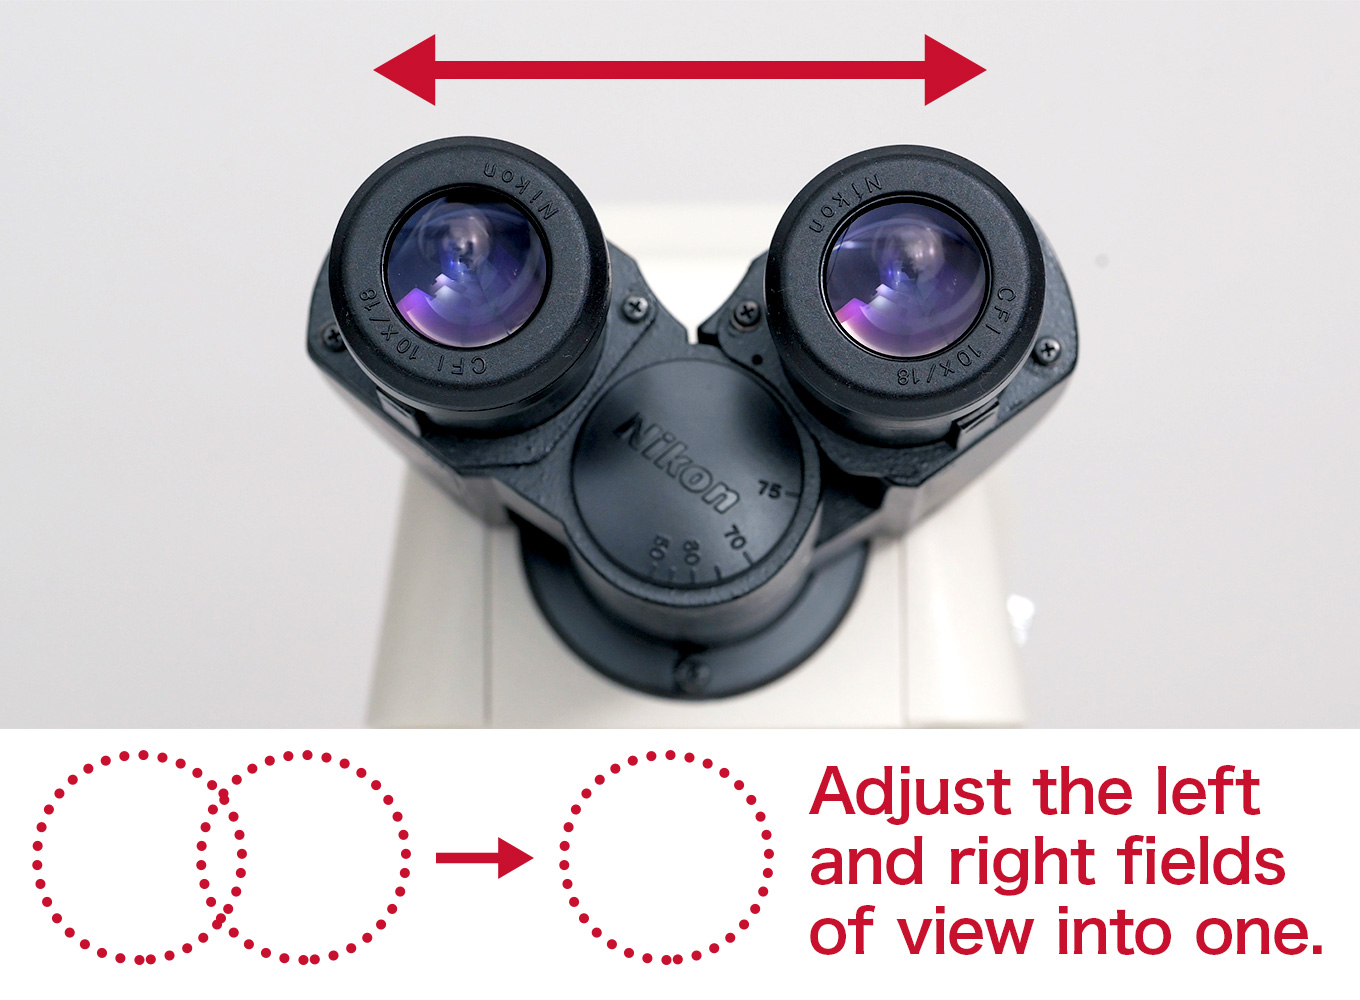 Adjust the left and right fields of view into one.